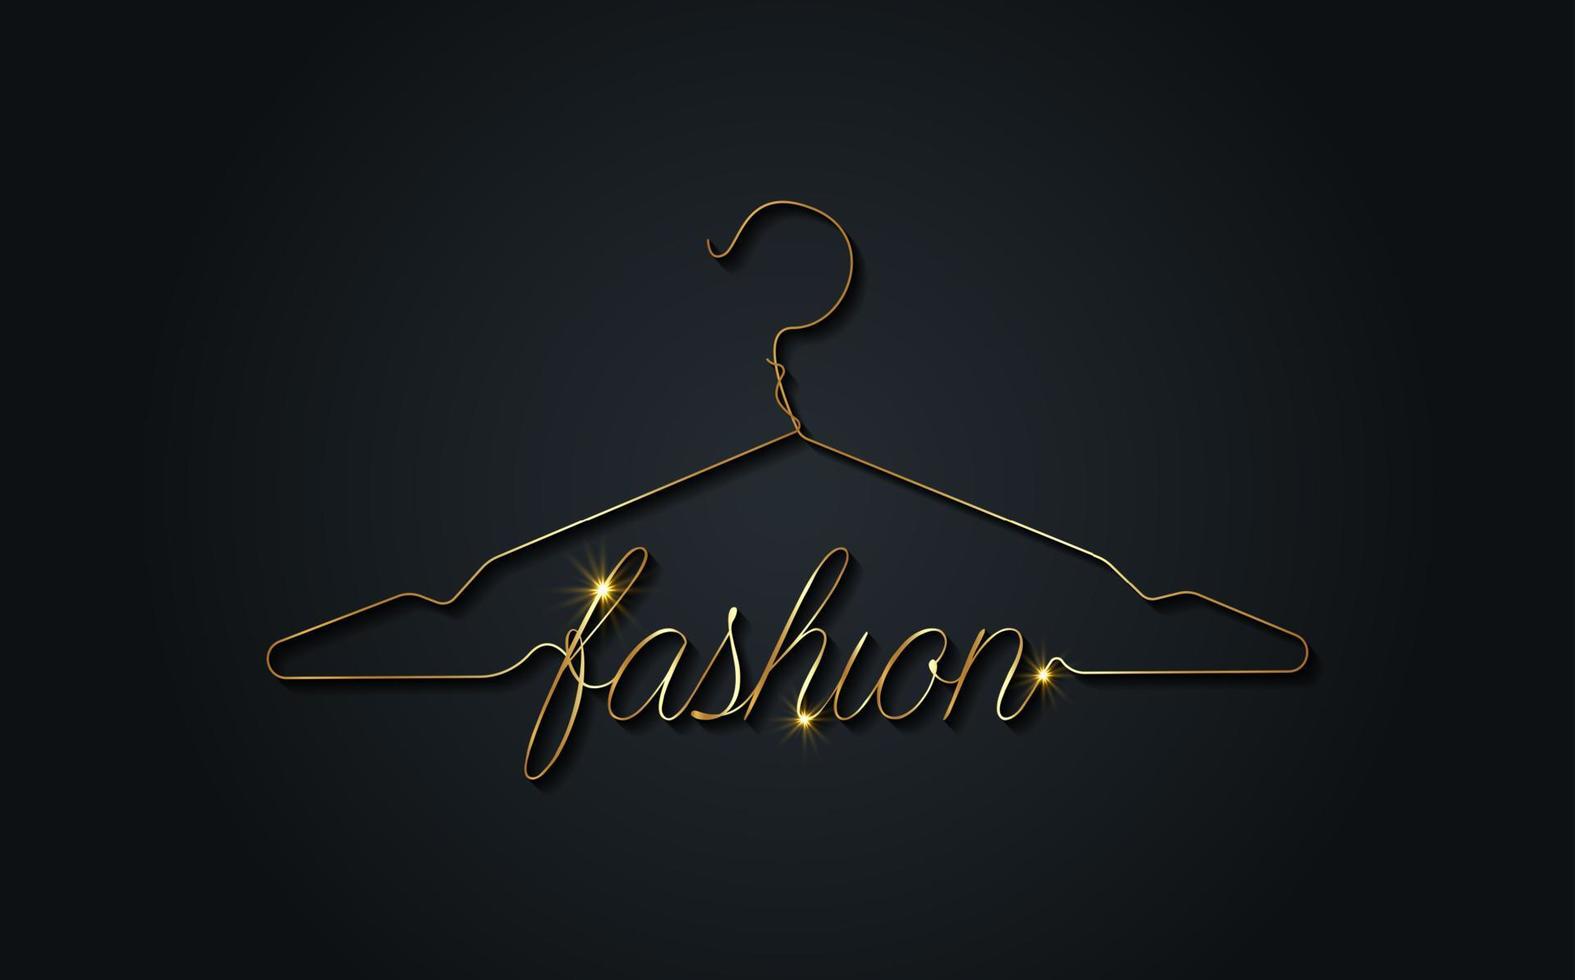 Creative fashion logo design. Gold vector sign with lettering and hanger symbol. Metallic Logotype calligraphy in line art style isolated on black background